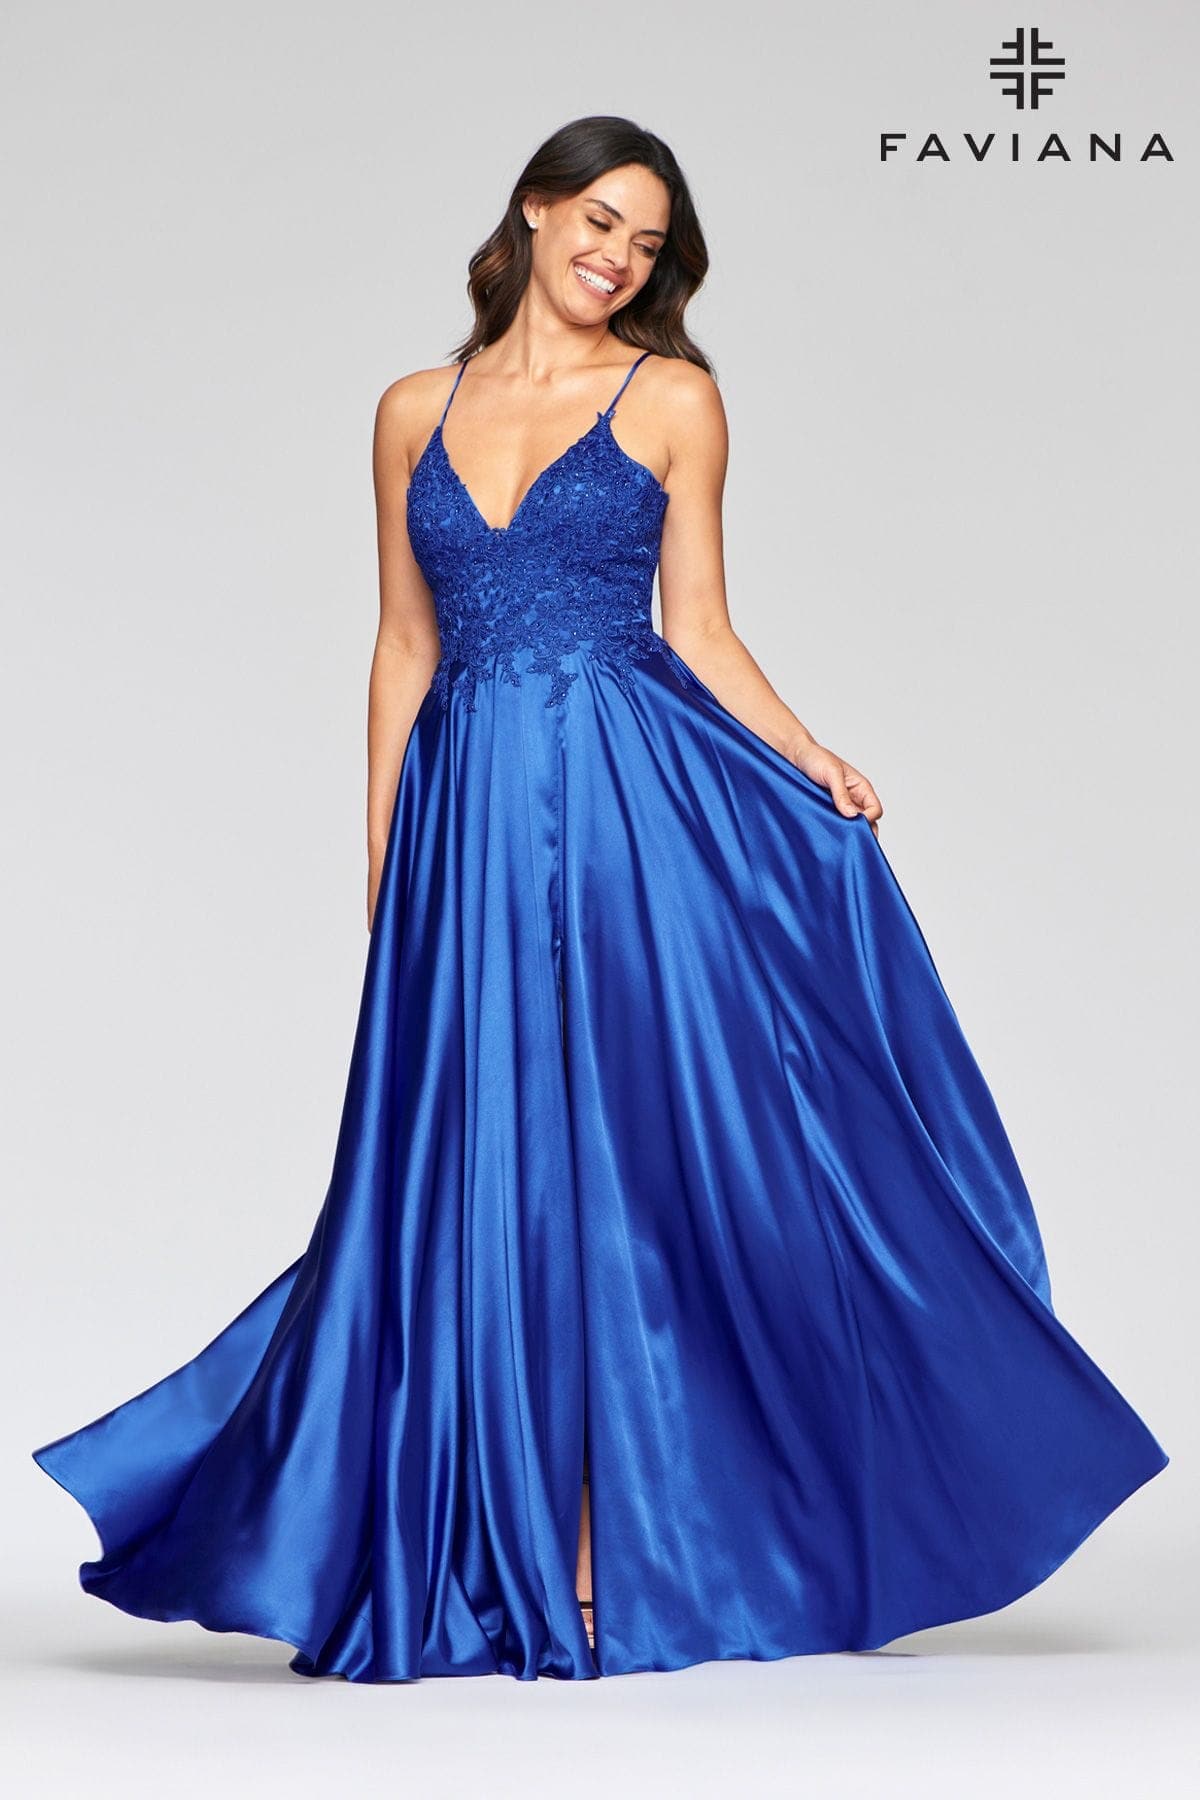 Royal Blue Long Flowy Prom Dress With Lace Bustier And Corset Back ...